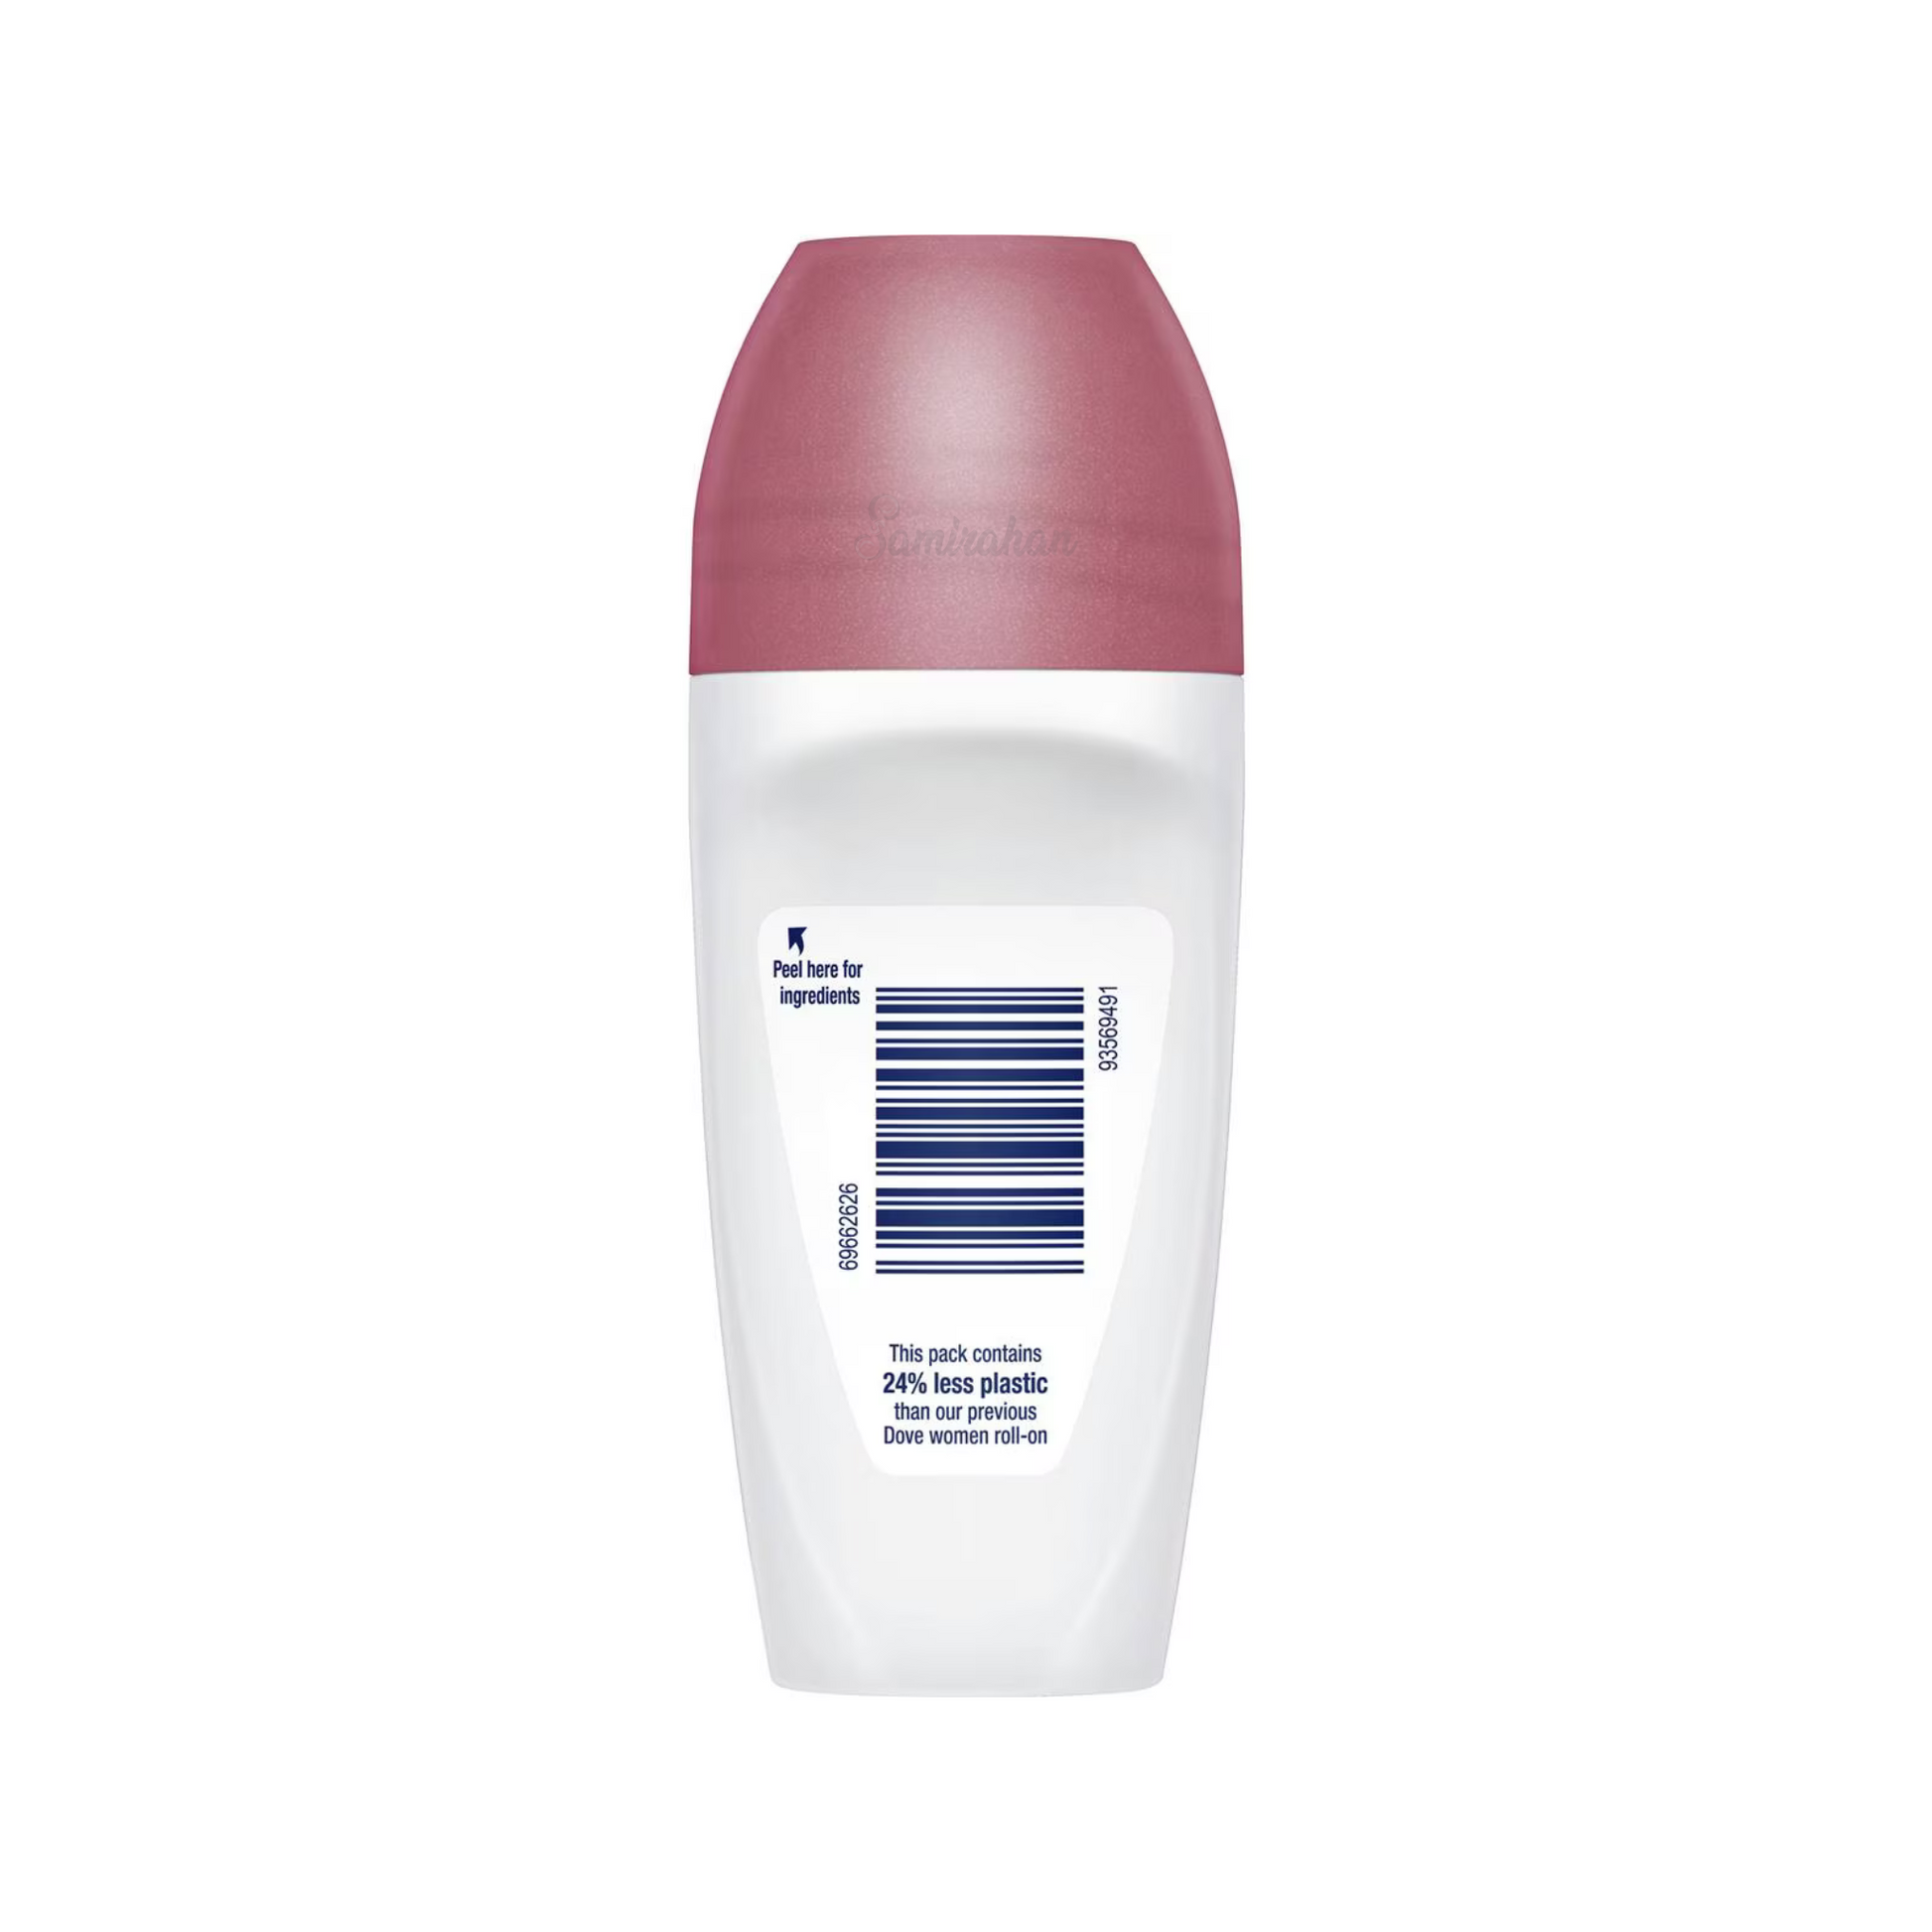 Dove Roll-On Deodorant Women Pomegranate is a deodorant that does not leave marks or stains on your clothes. Best imported foreign Australian Aussie American genuine authentic original premium quality real hygiene skincare beauty skin care personal healthy underarms price in Dhaka Chittagong Sylhet Barisal Bangladesh.